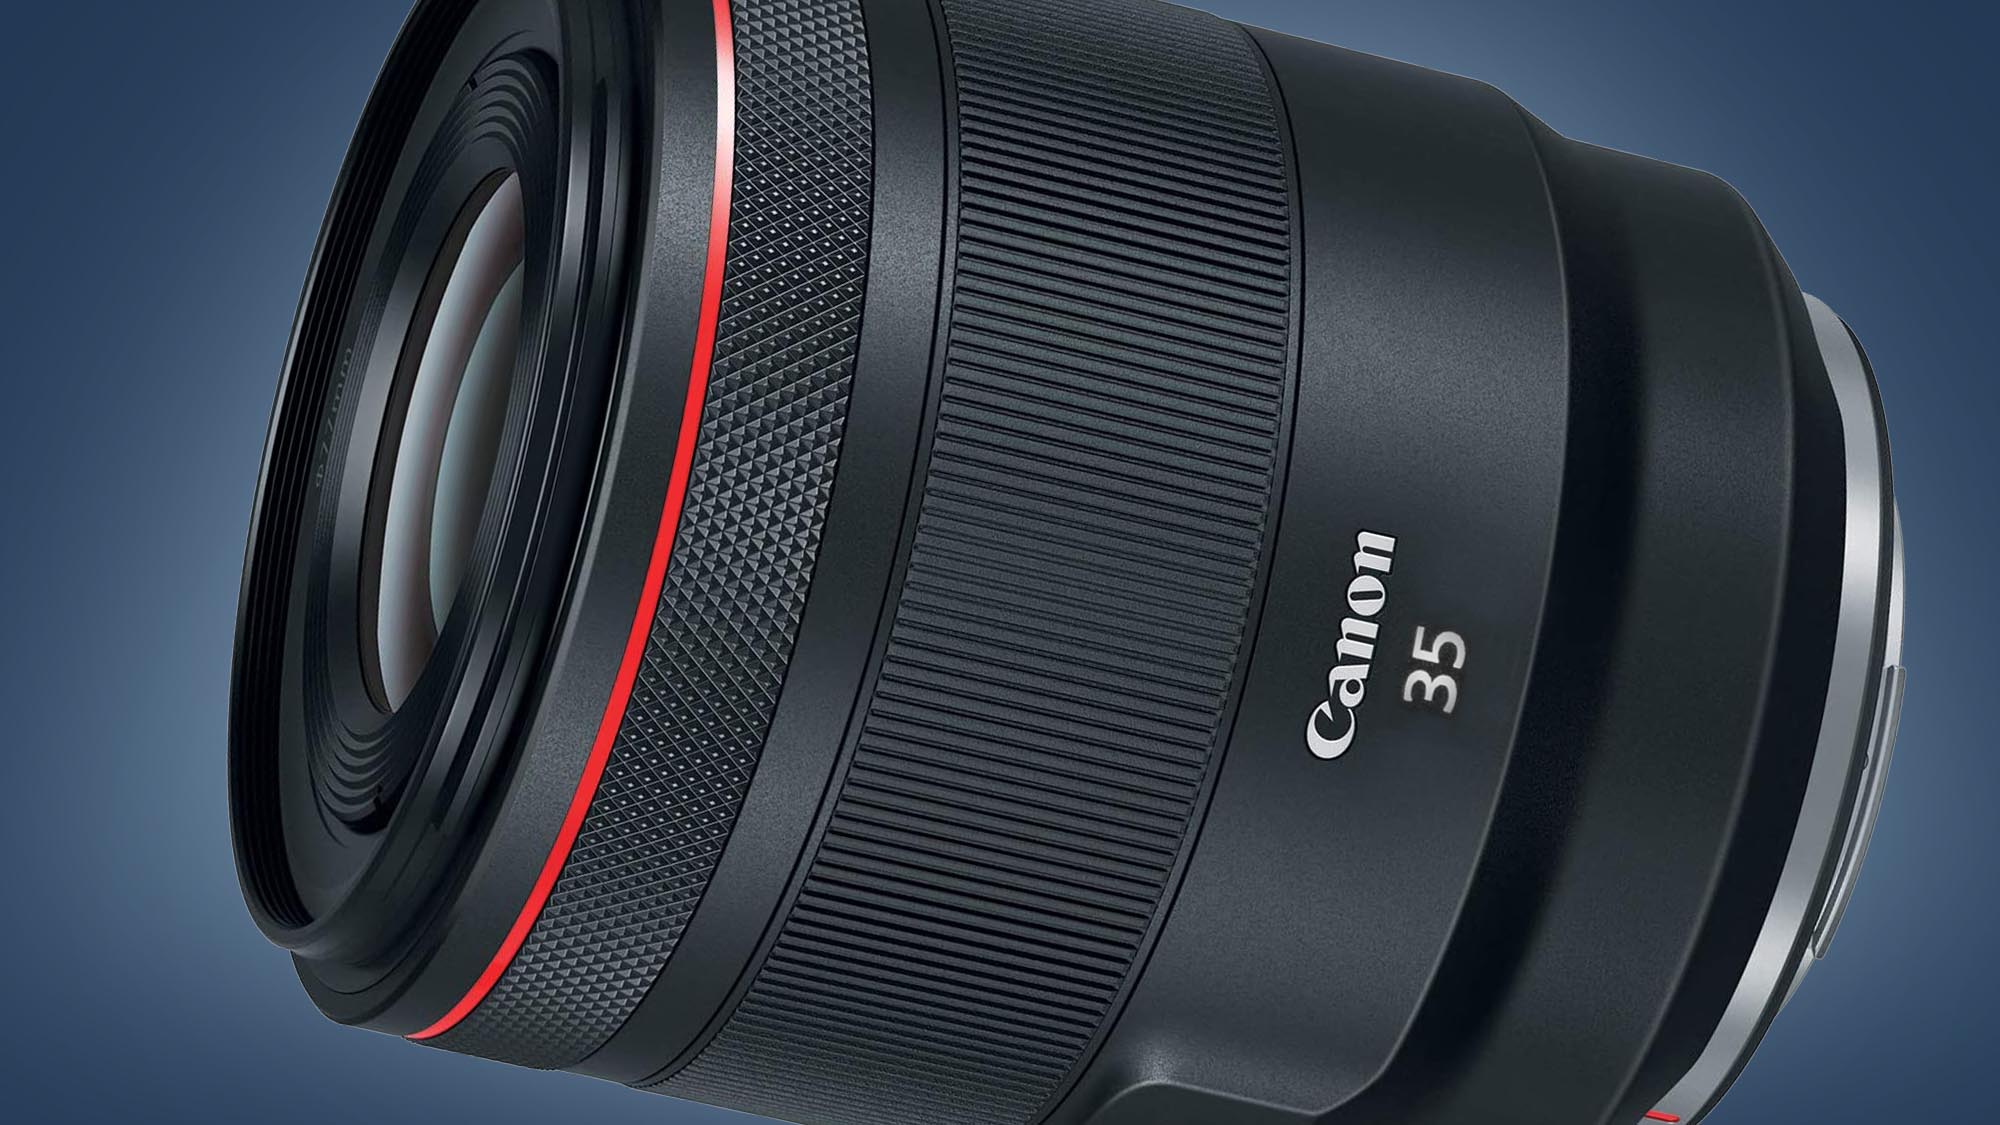 Canon's next lens could be the versatile prime fans are waiting for